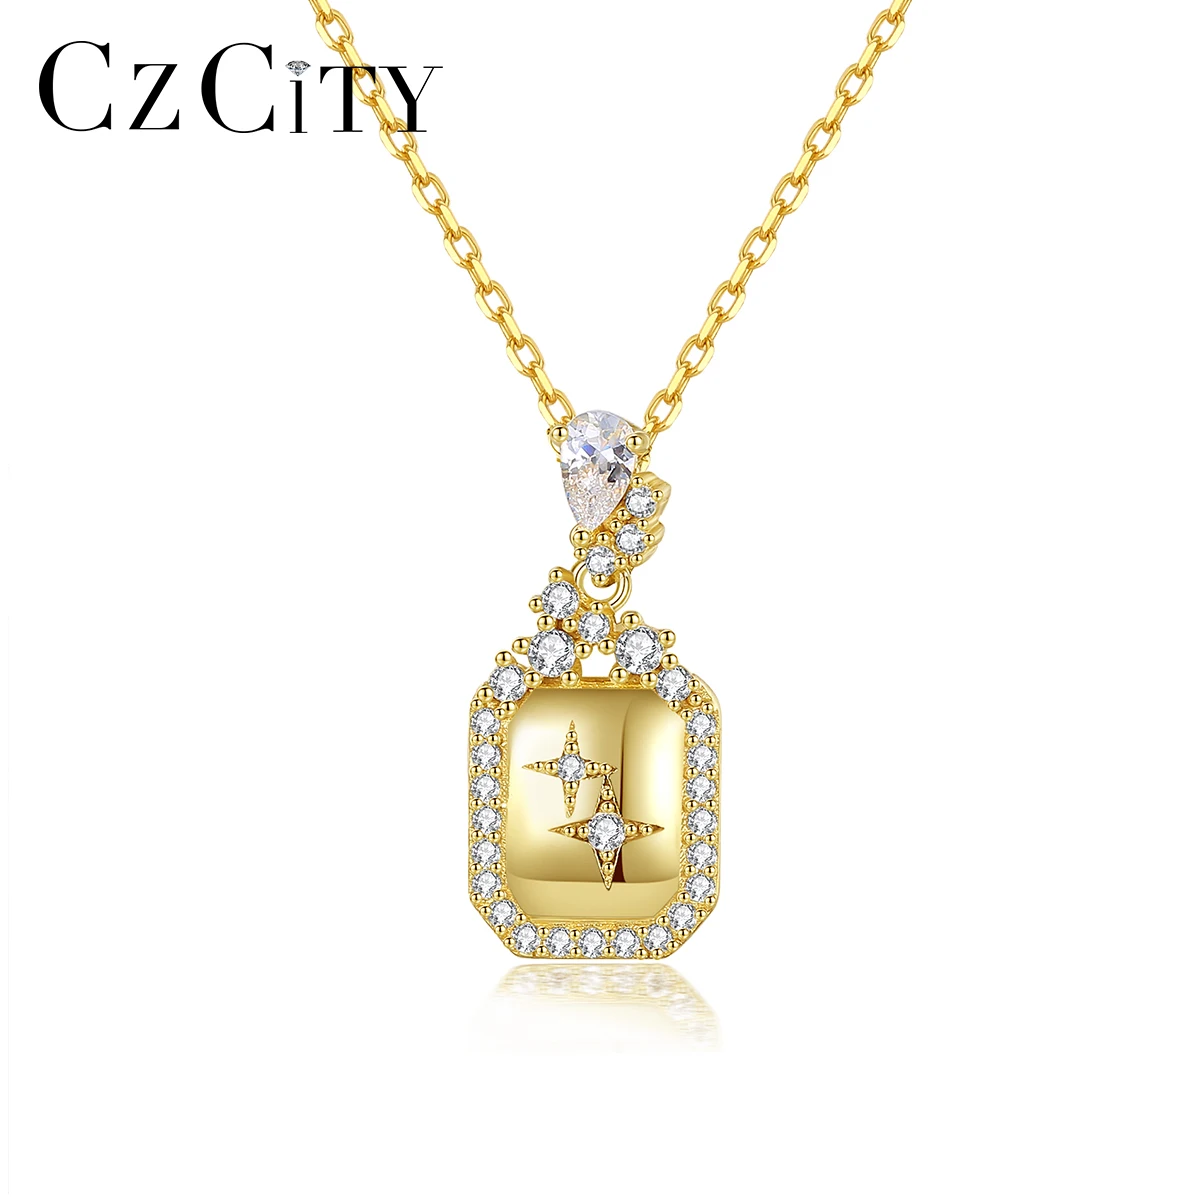 

CZCITY 14K Gold Plated Necklace Fashion Jewelry Designer Charm Trending 925 Silver Woman Jewellery Pendant